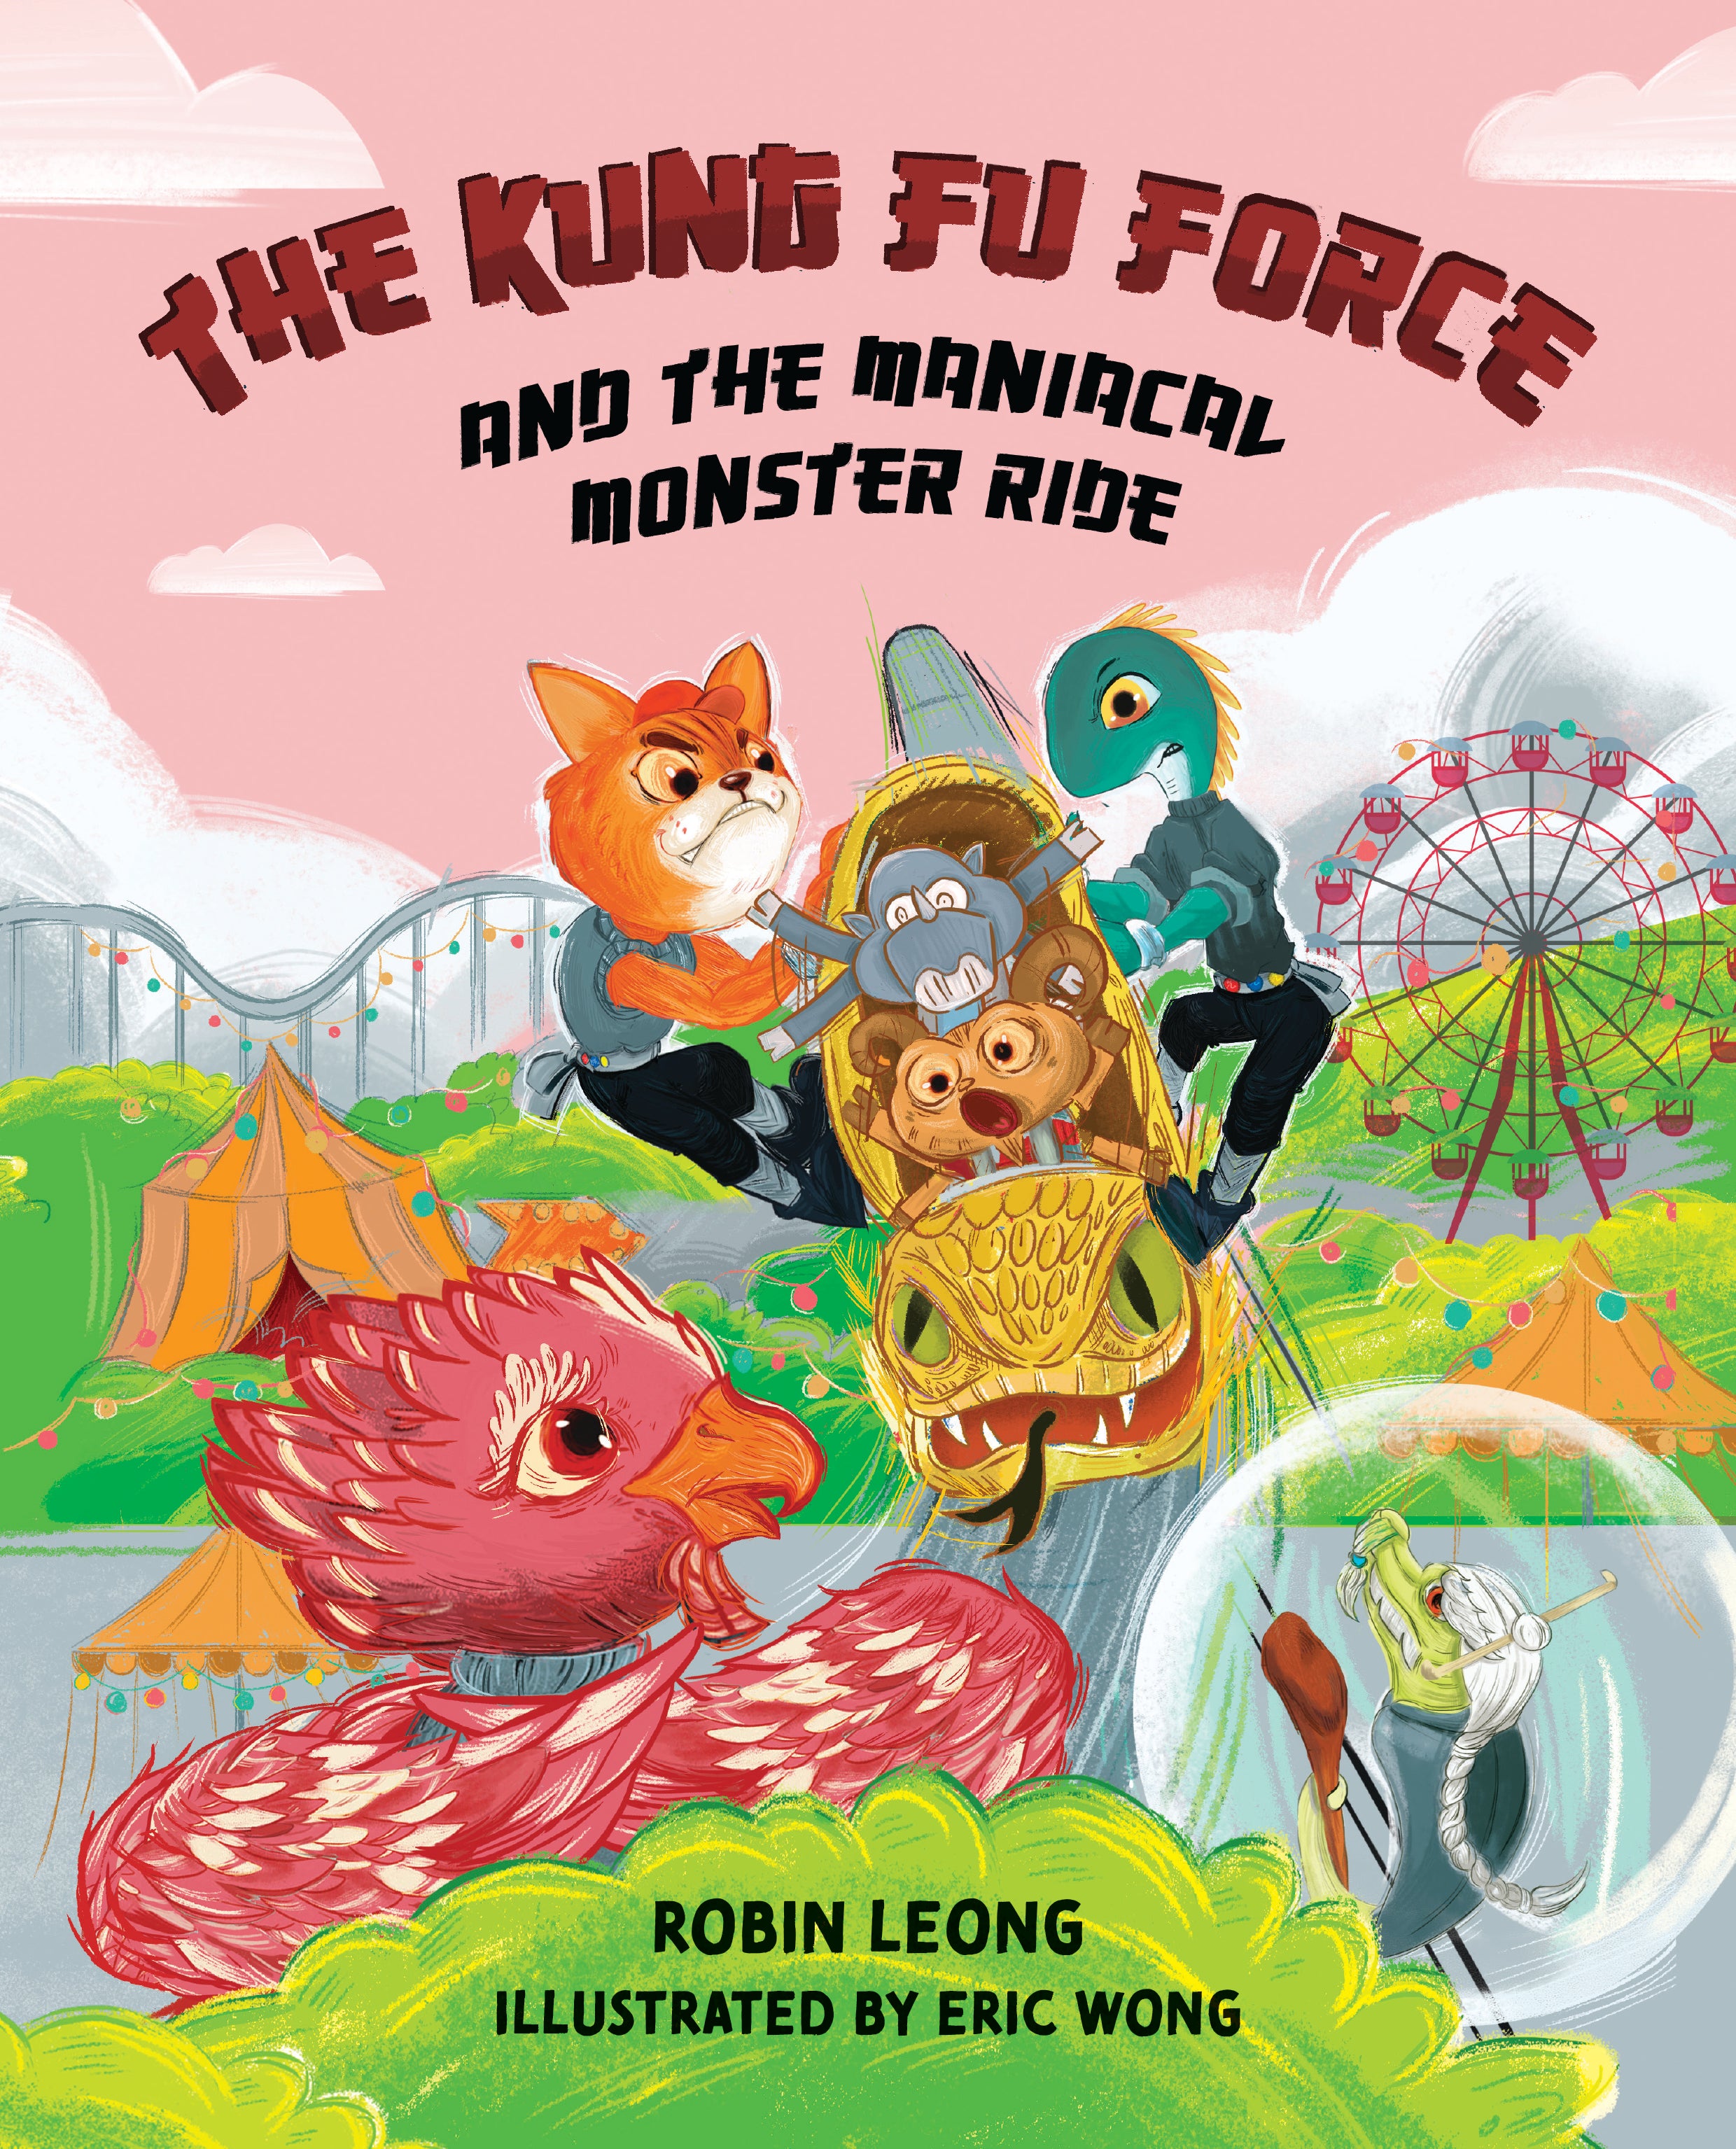 The Kung Fu Force and the Maniacal Monster Ride (Book 3)